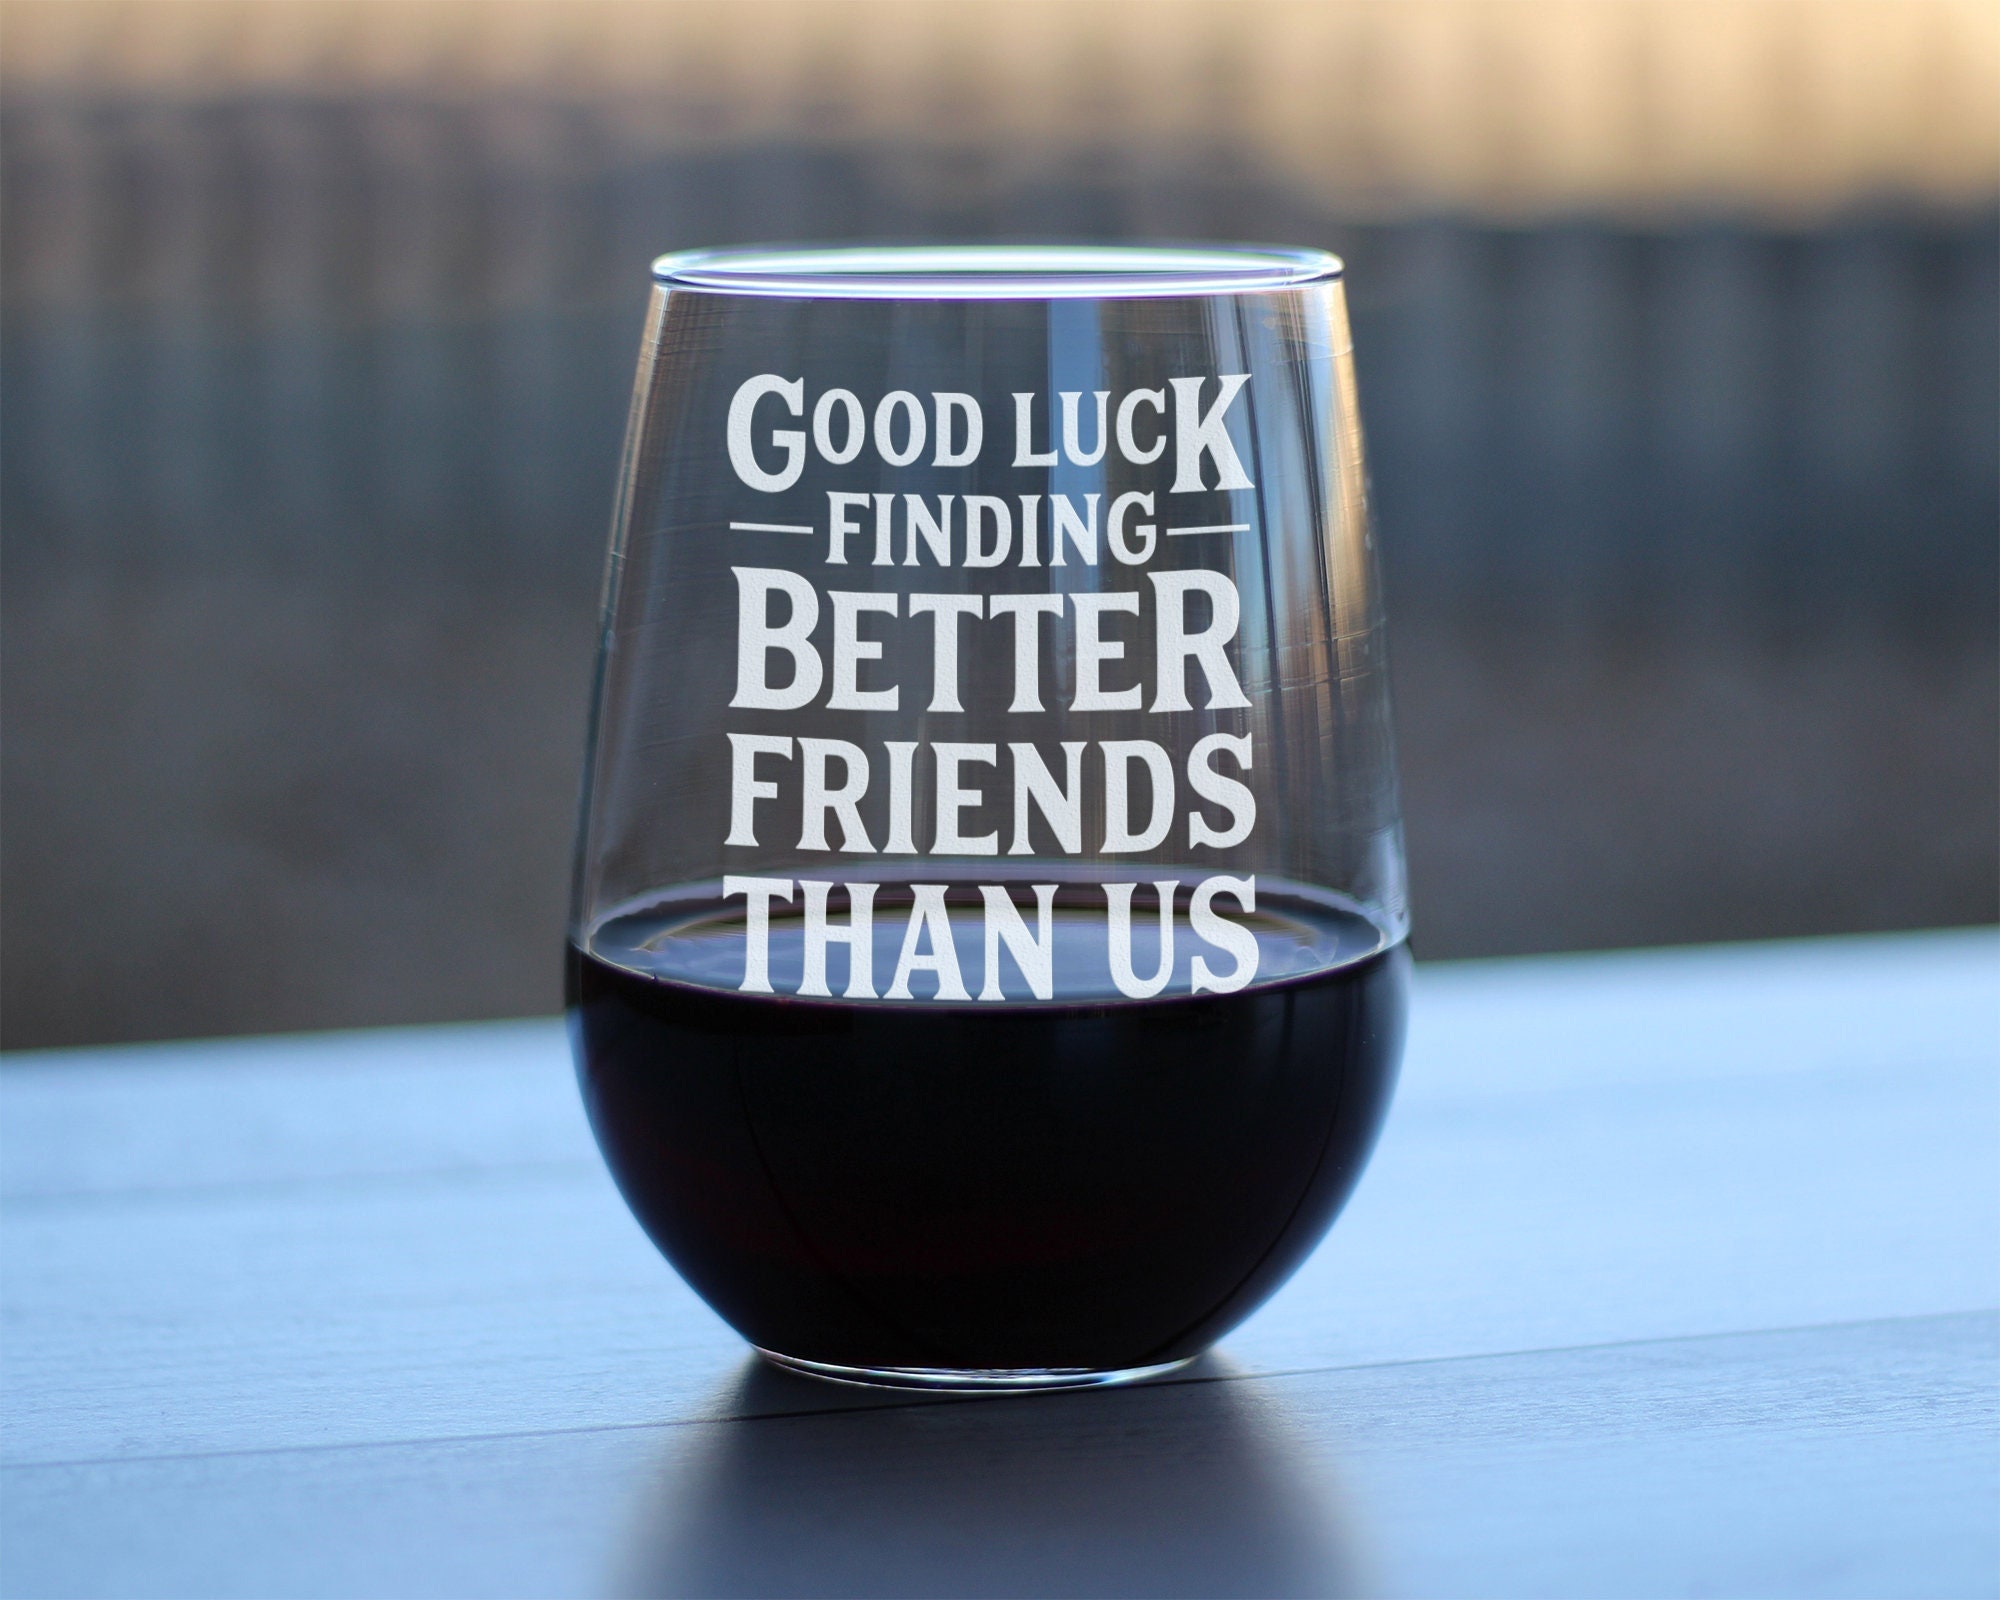 Good Luck Finding Better Friends Than Us - Insulated Coffee Tumbler Cu -  bevvee